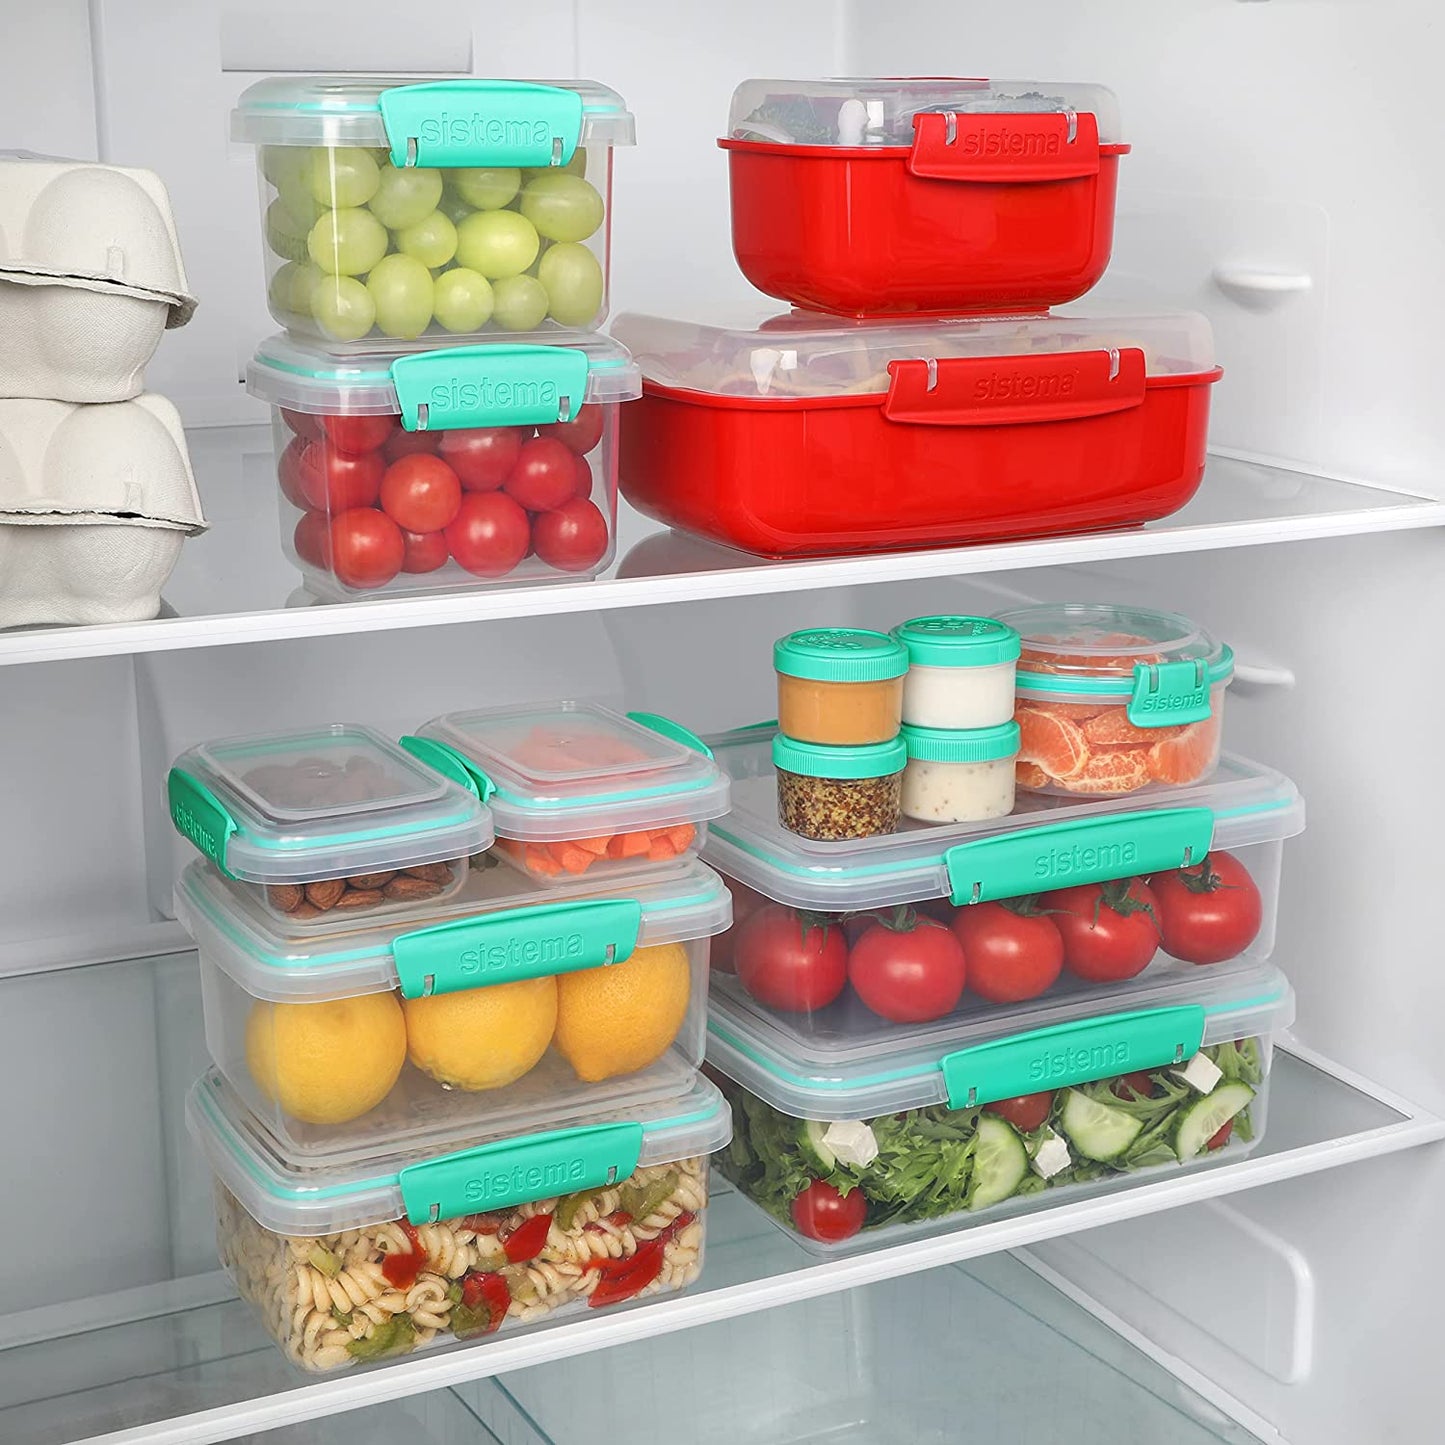 New Home Kitchen Storage & Organisation Gift Pack | 18 Food Storage Containers with Lids | Lunch Boxes, Meal Prep Containers, Pantry Storage, Microwave Food Steamers & More | Bpa-Free